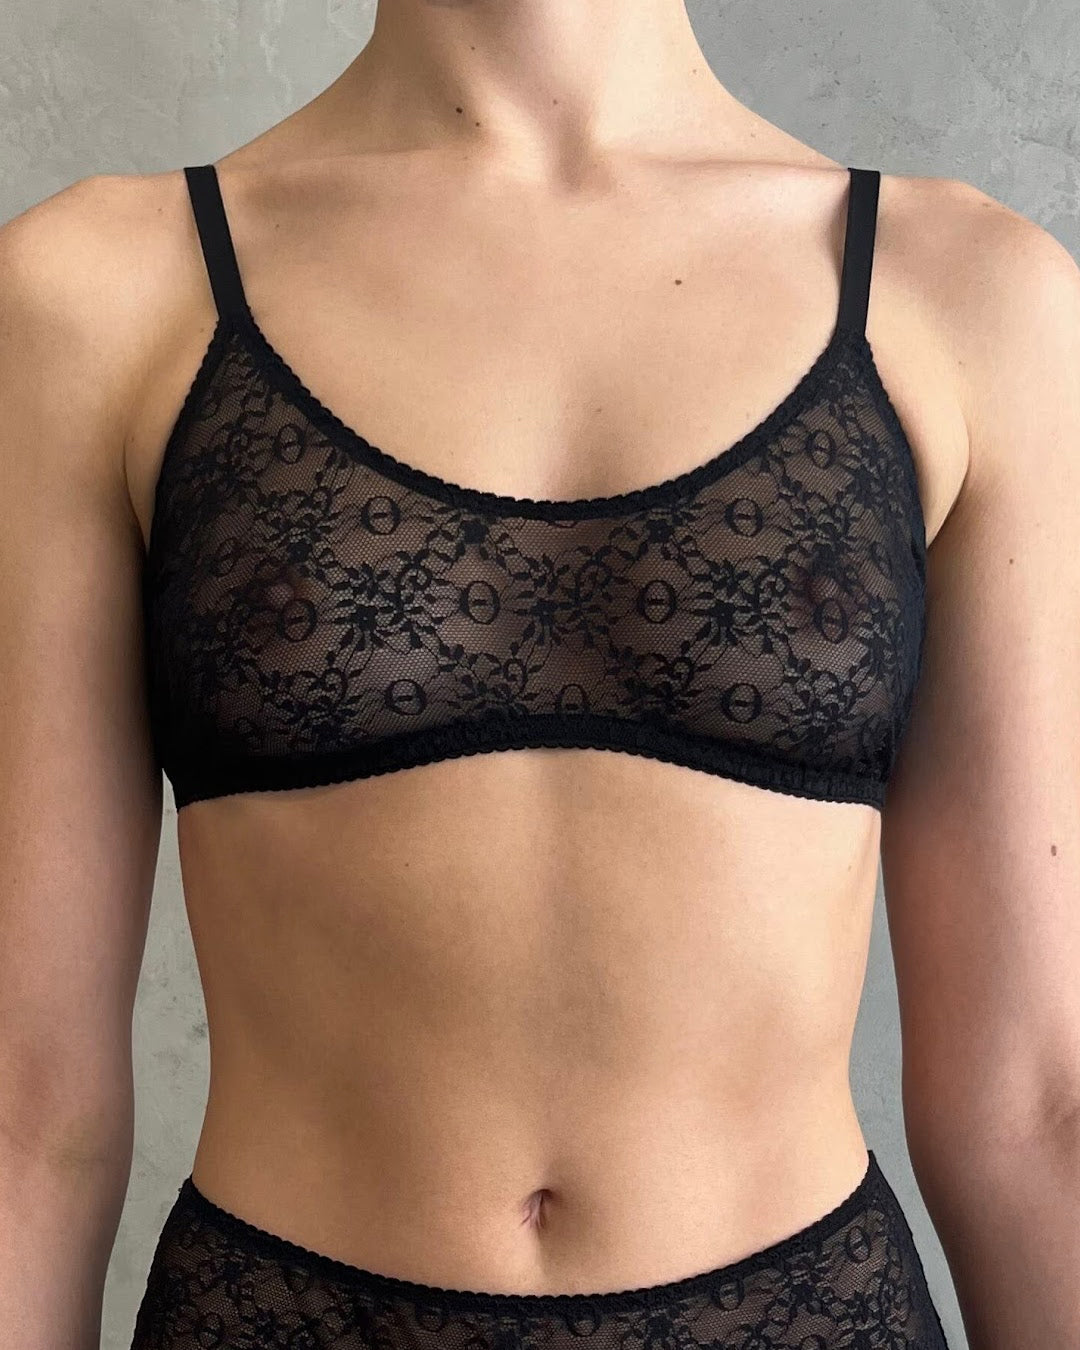 Thistle and Spire Eros Lace Longline Bra